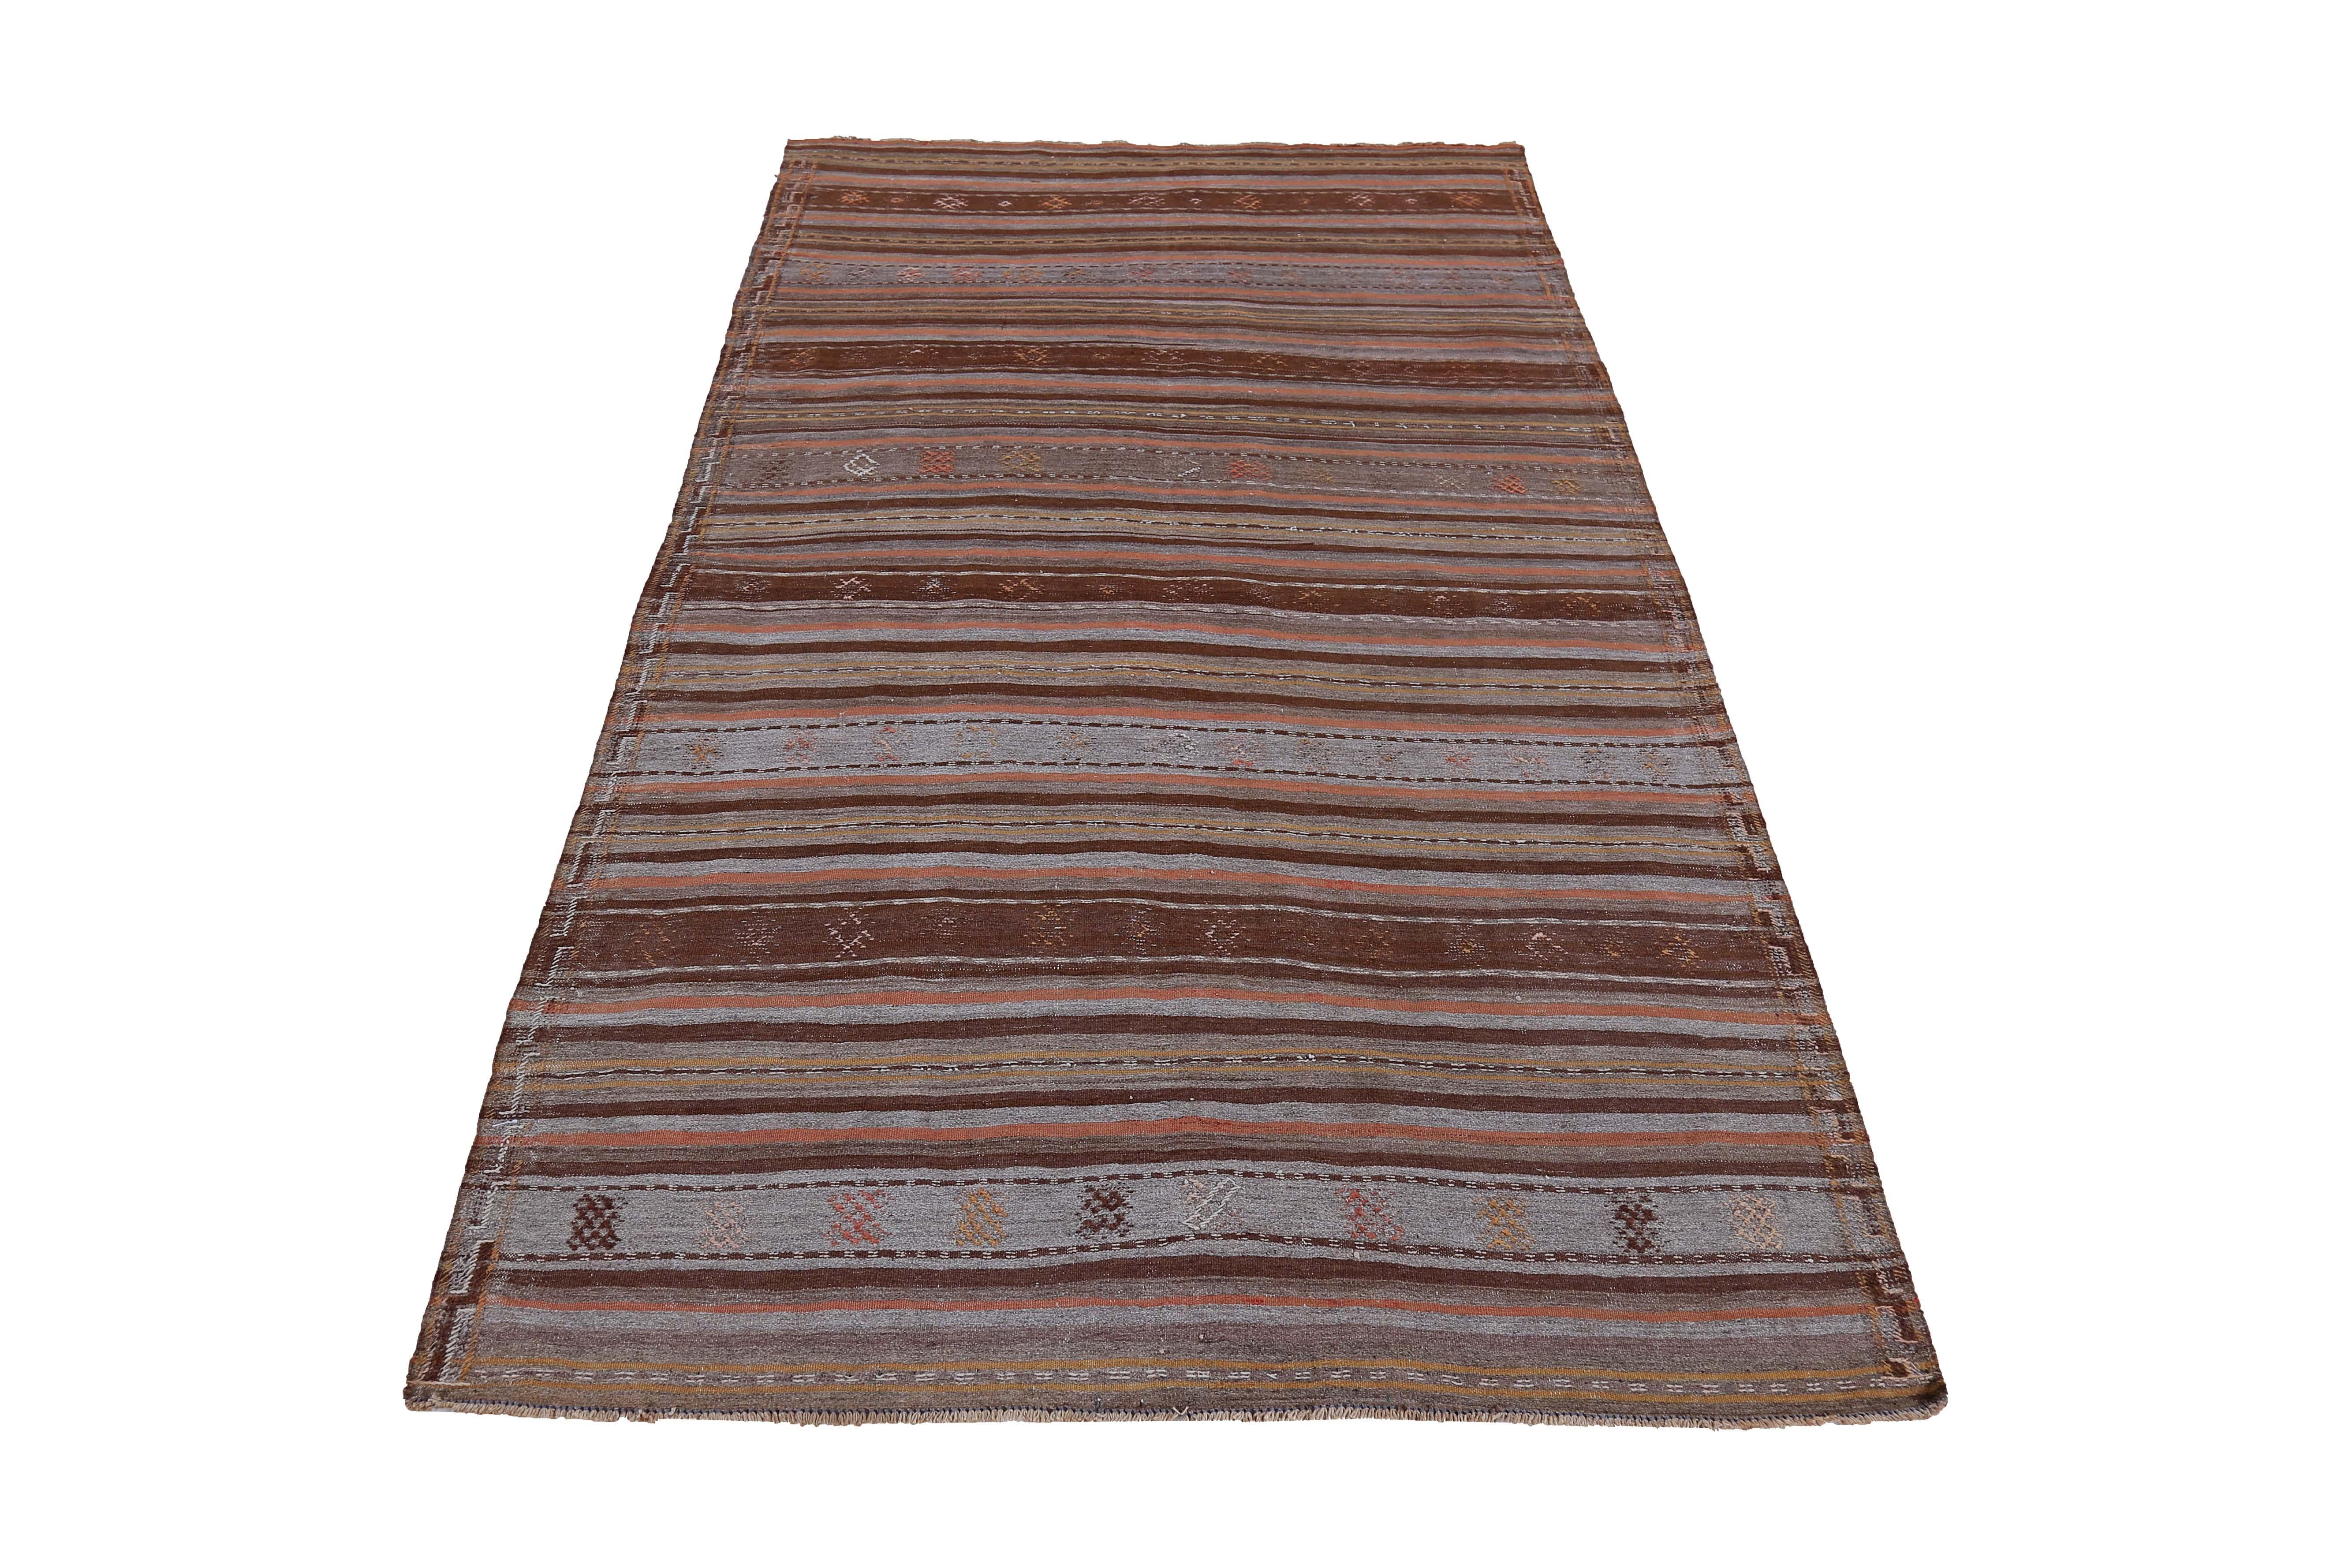 Modern Turkish rug handwoven from the finest sheep’s wool and colored with all-natural vegetable dyes that are safe for humans and pets. It’s a traditional Kilim flat-weave design featuring brown, orange and gray stripes. It’s a stunning piece to